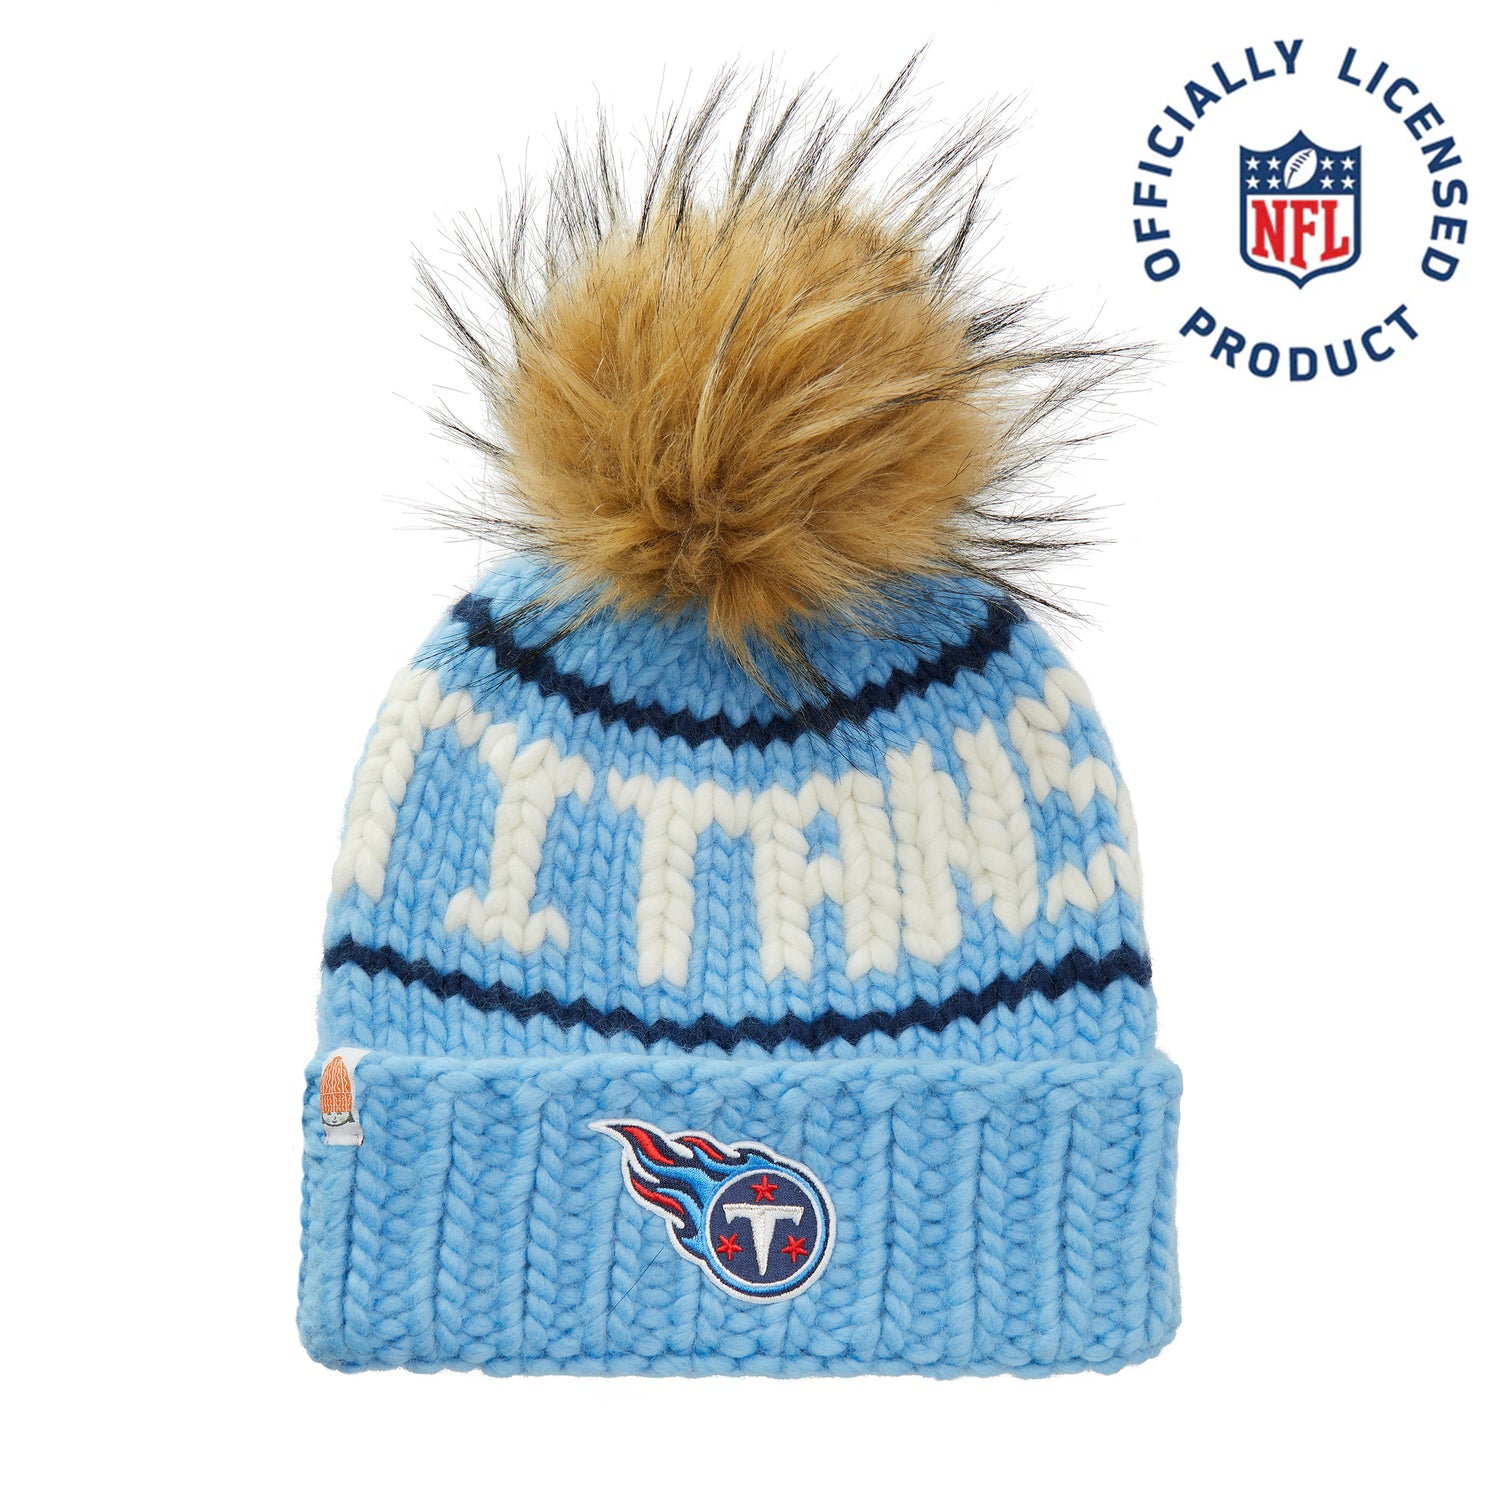 The Titans NFL Beanie with Faux Fur Pom